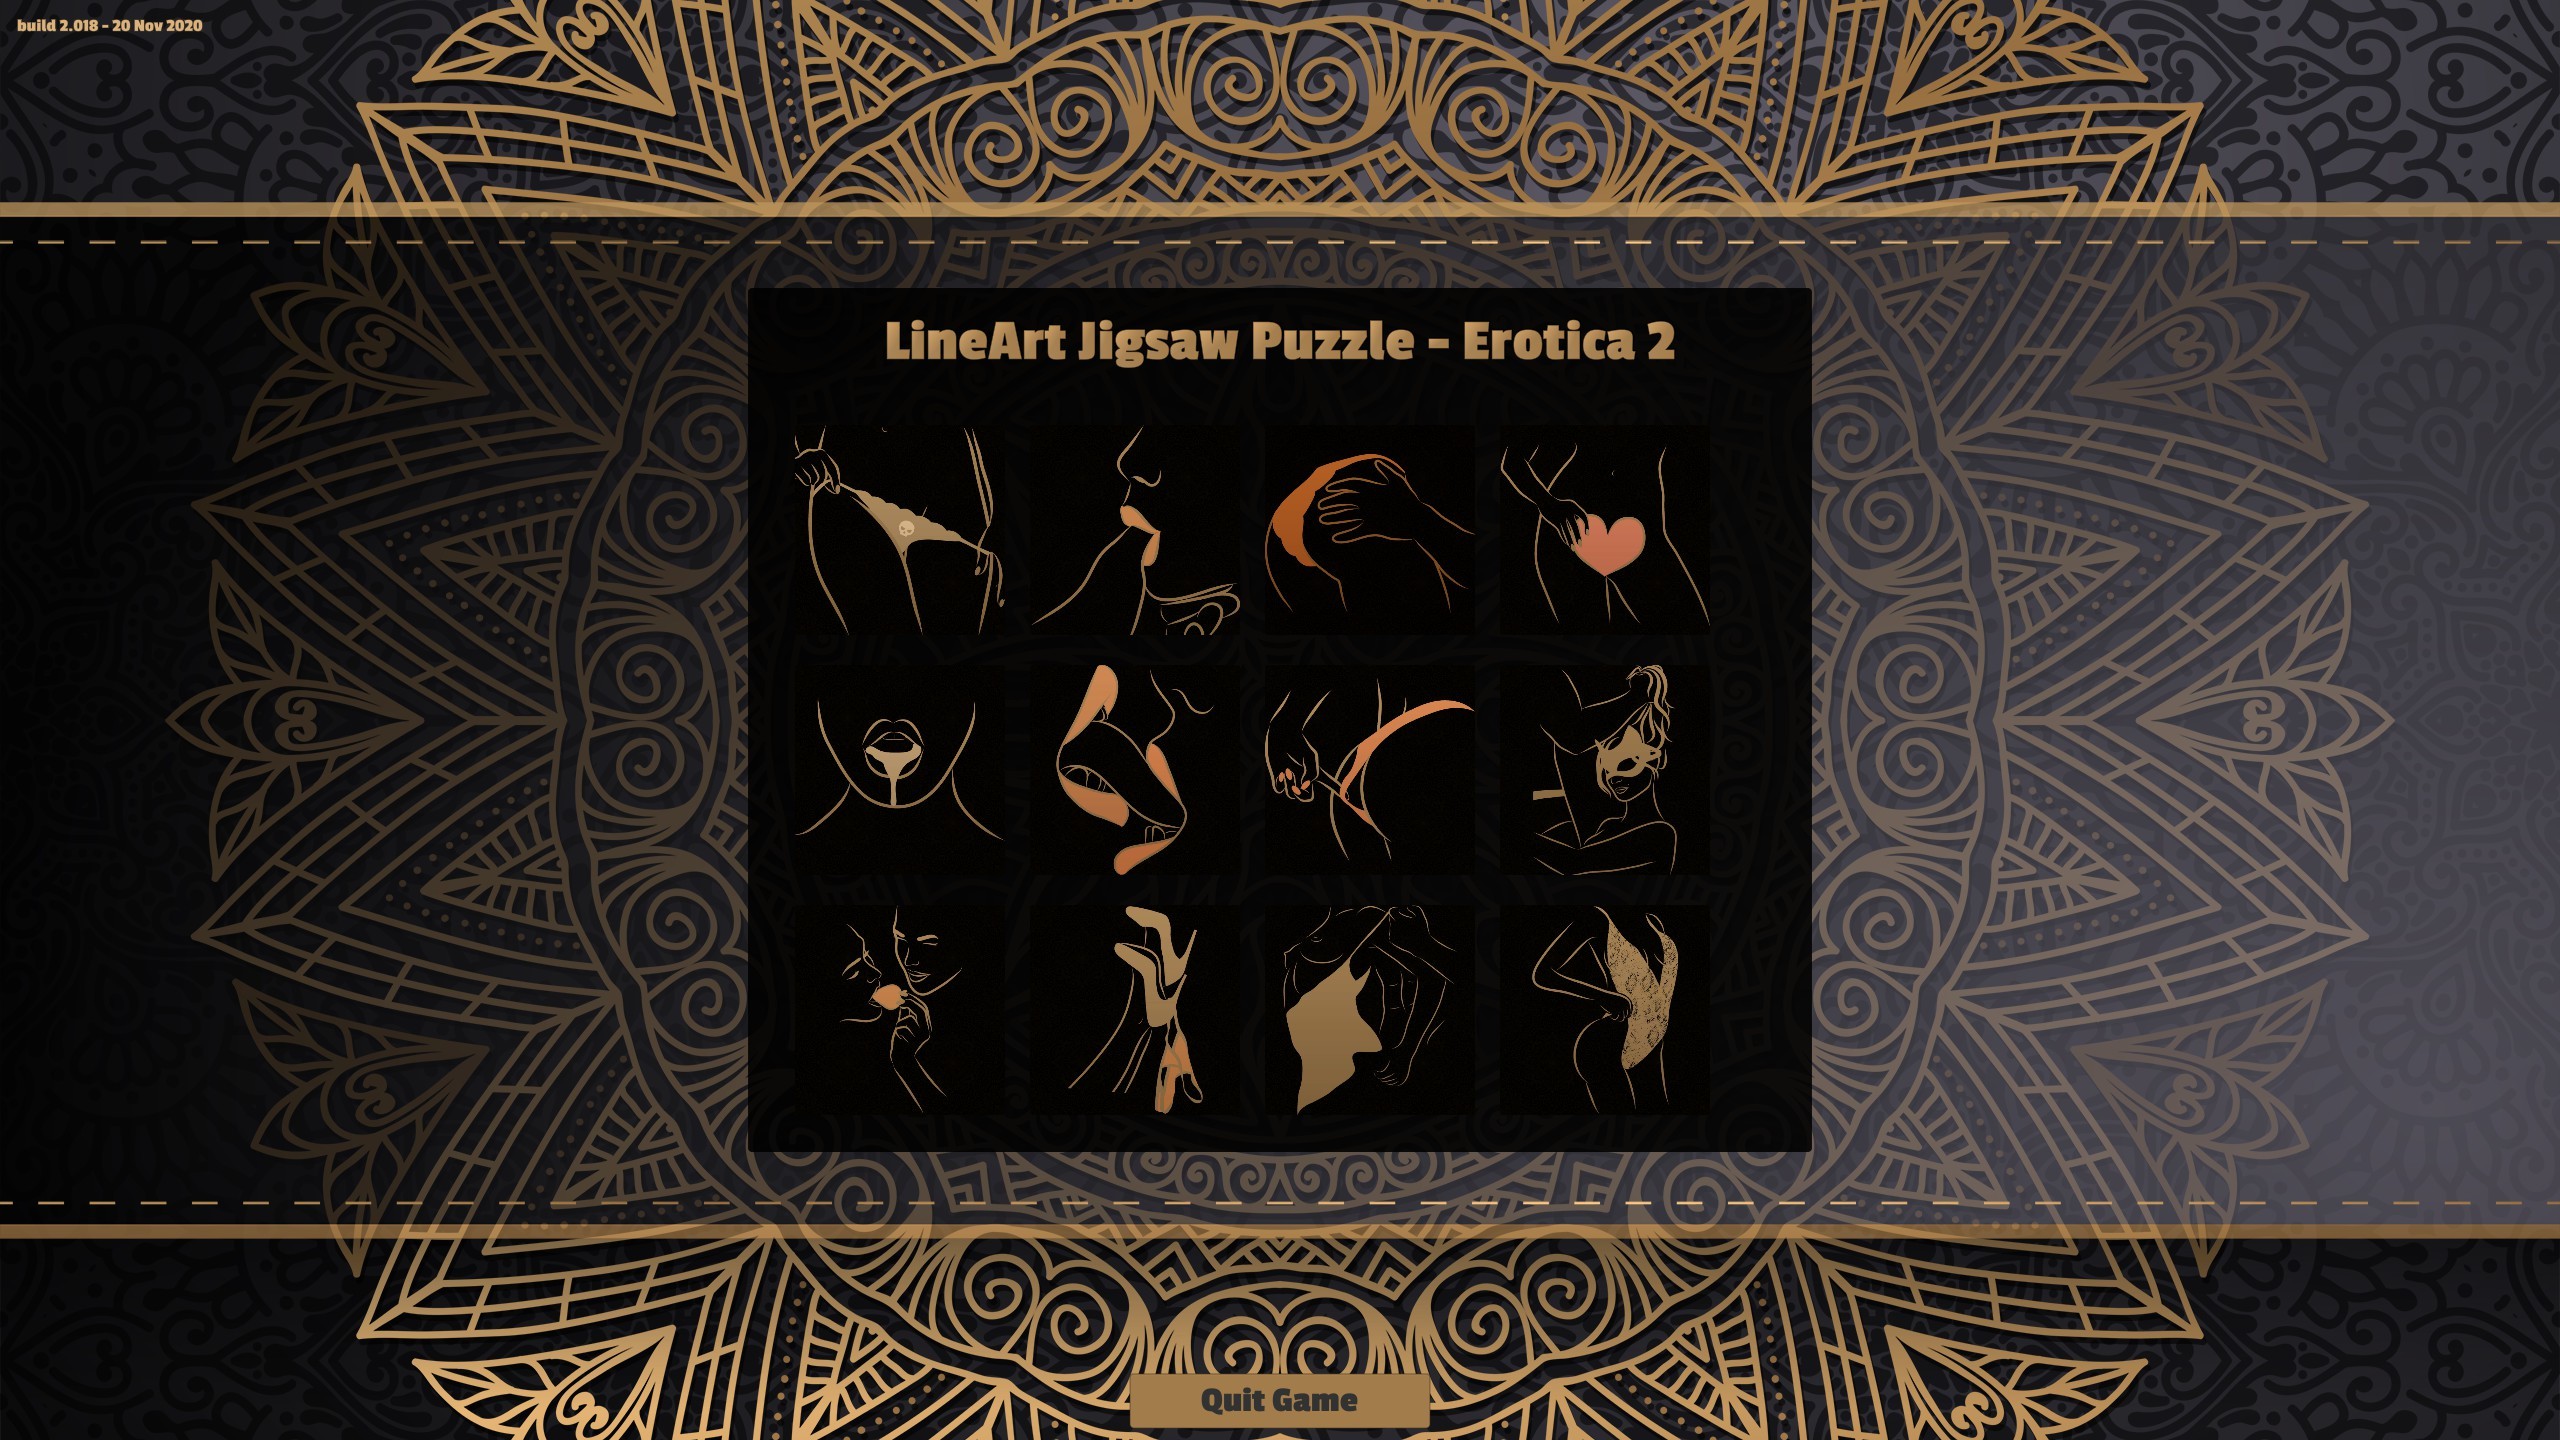 LineArt Jigsaw Puzzle - Erotica 2 Steam CD Key, 0.21$